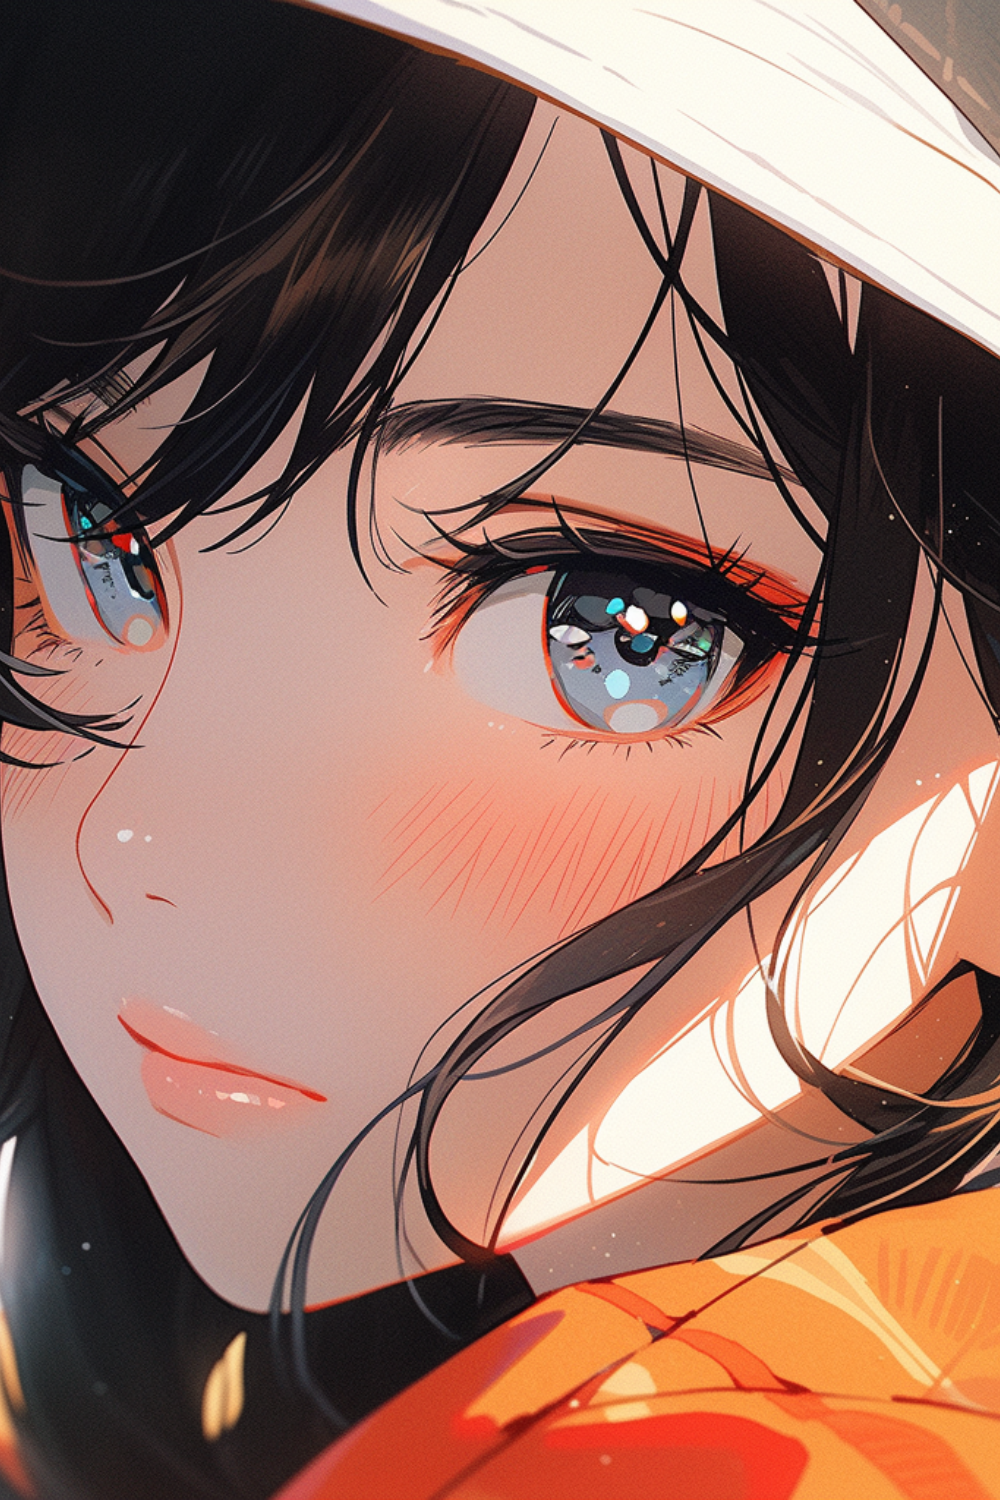 Soulful Eyes, Anime Art | High resolution instant download